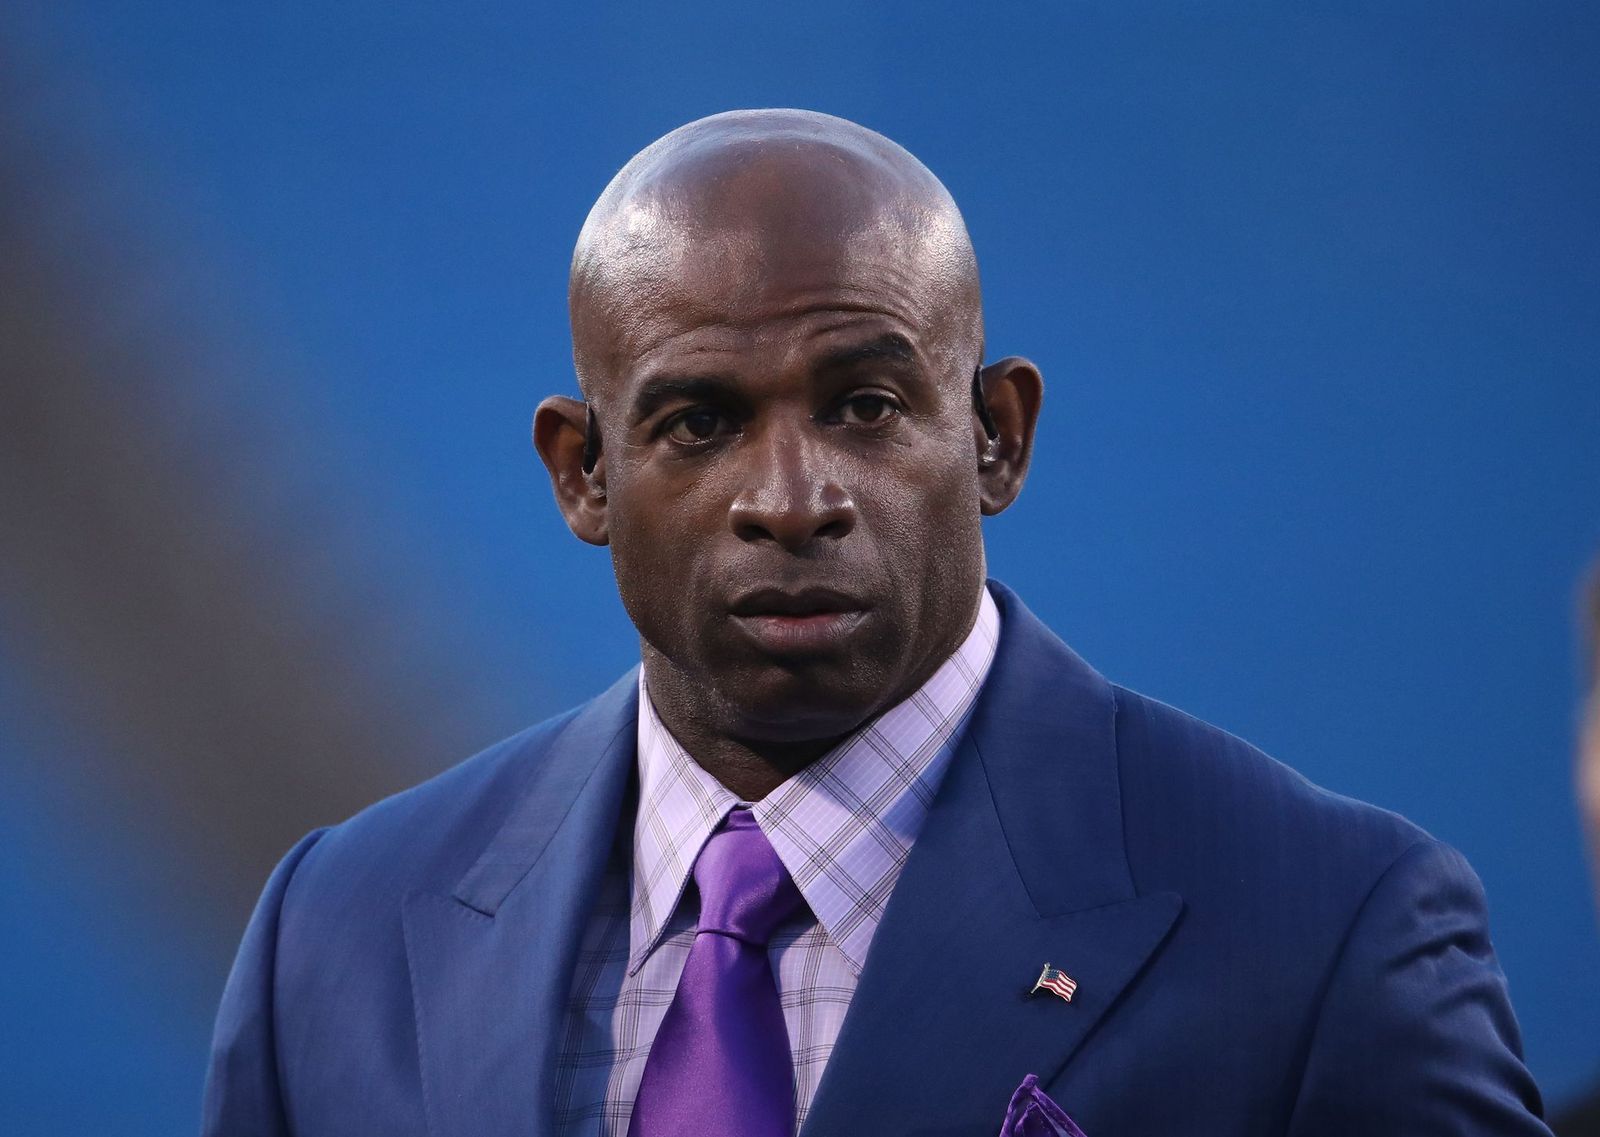 Deion Sanders during the Buffalo Bills NFL game against the New York Jets at New Era Field on September 15, 2016 in Orchard Park, New York. | Source: Getty Images